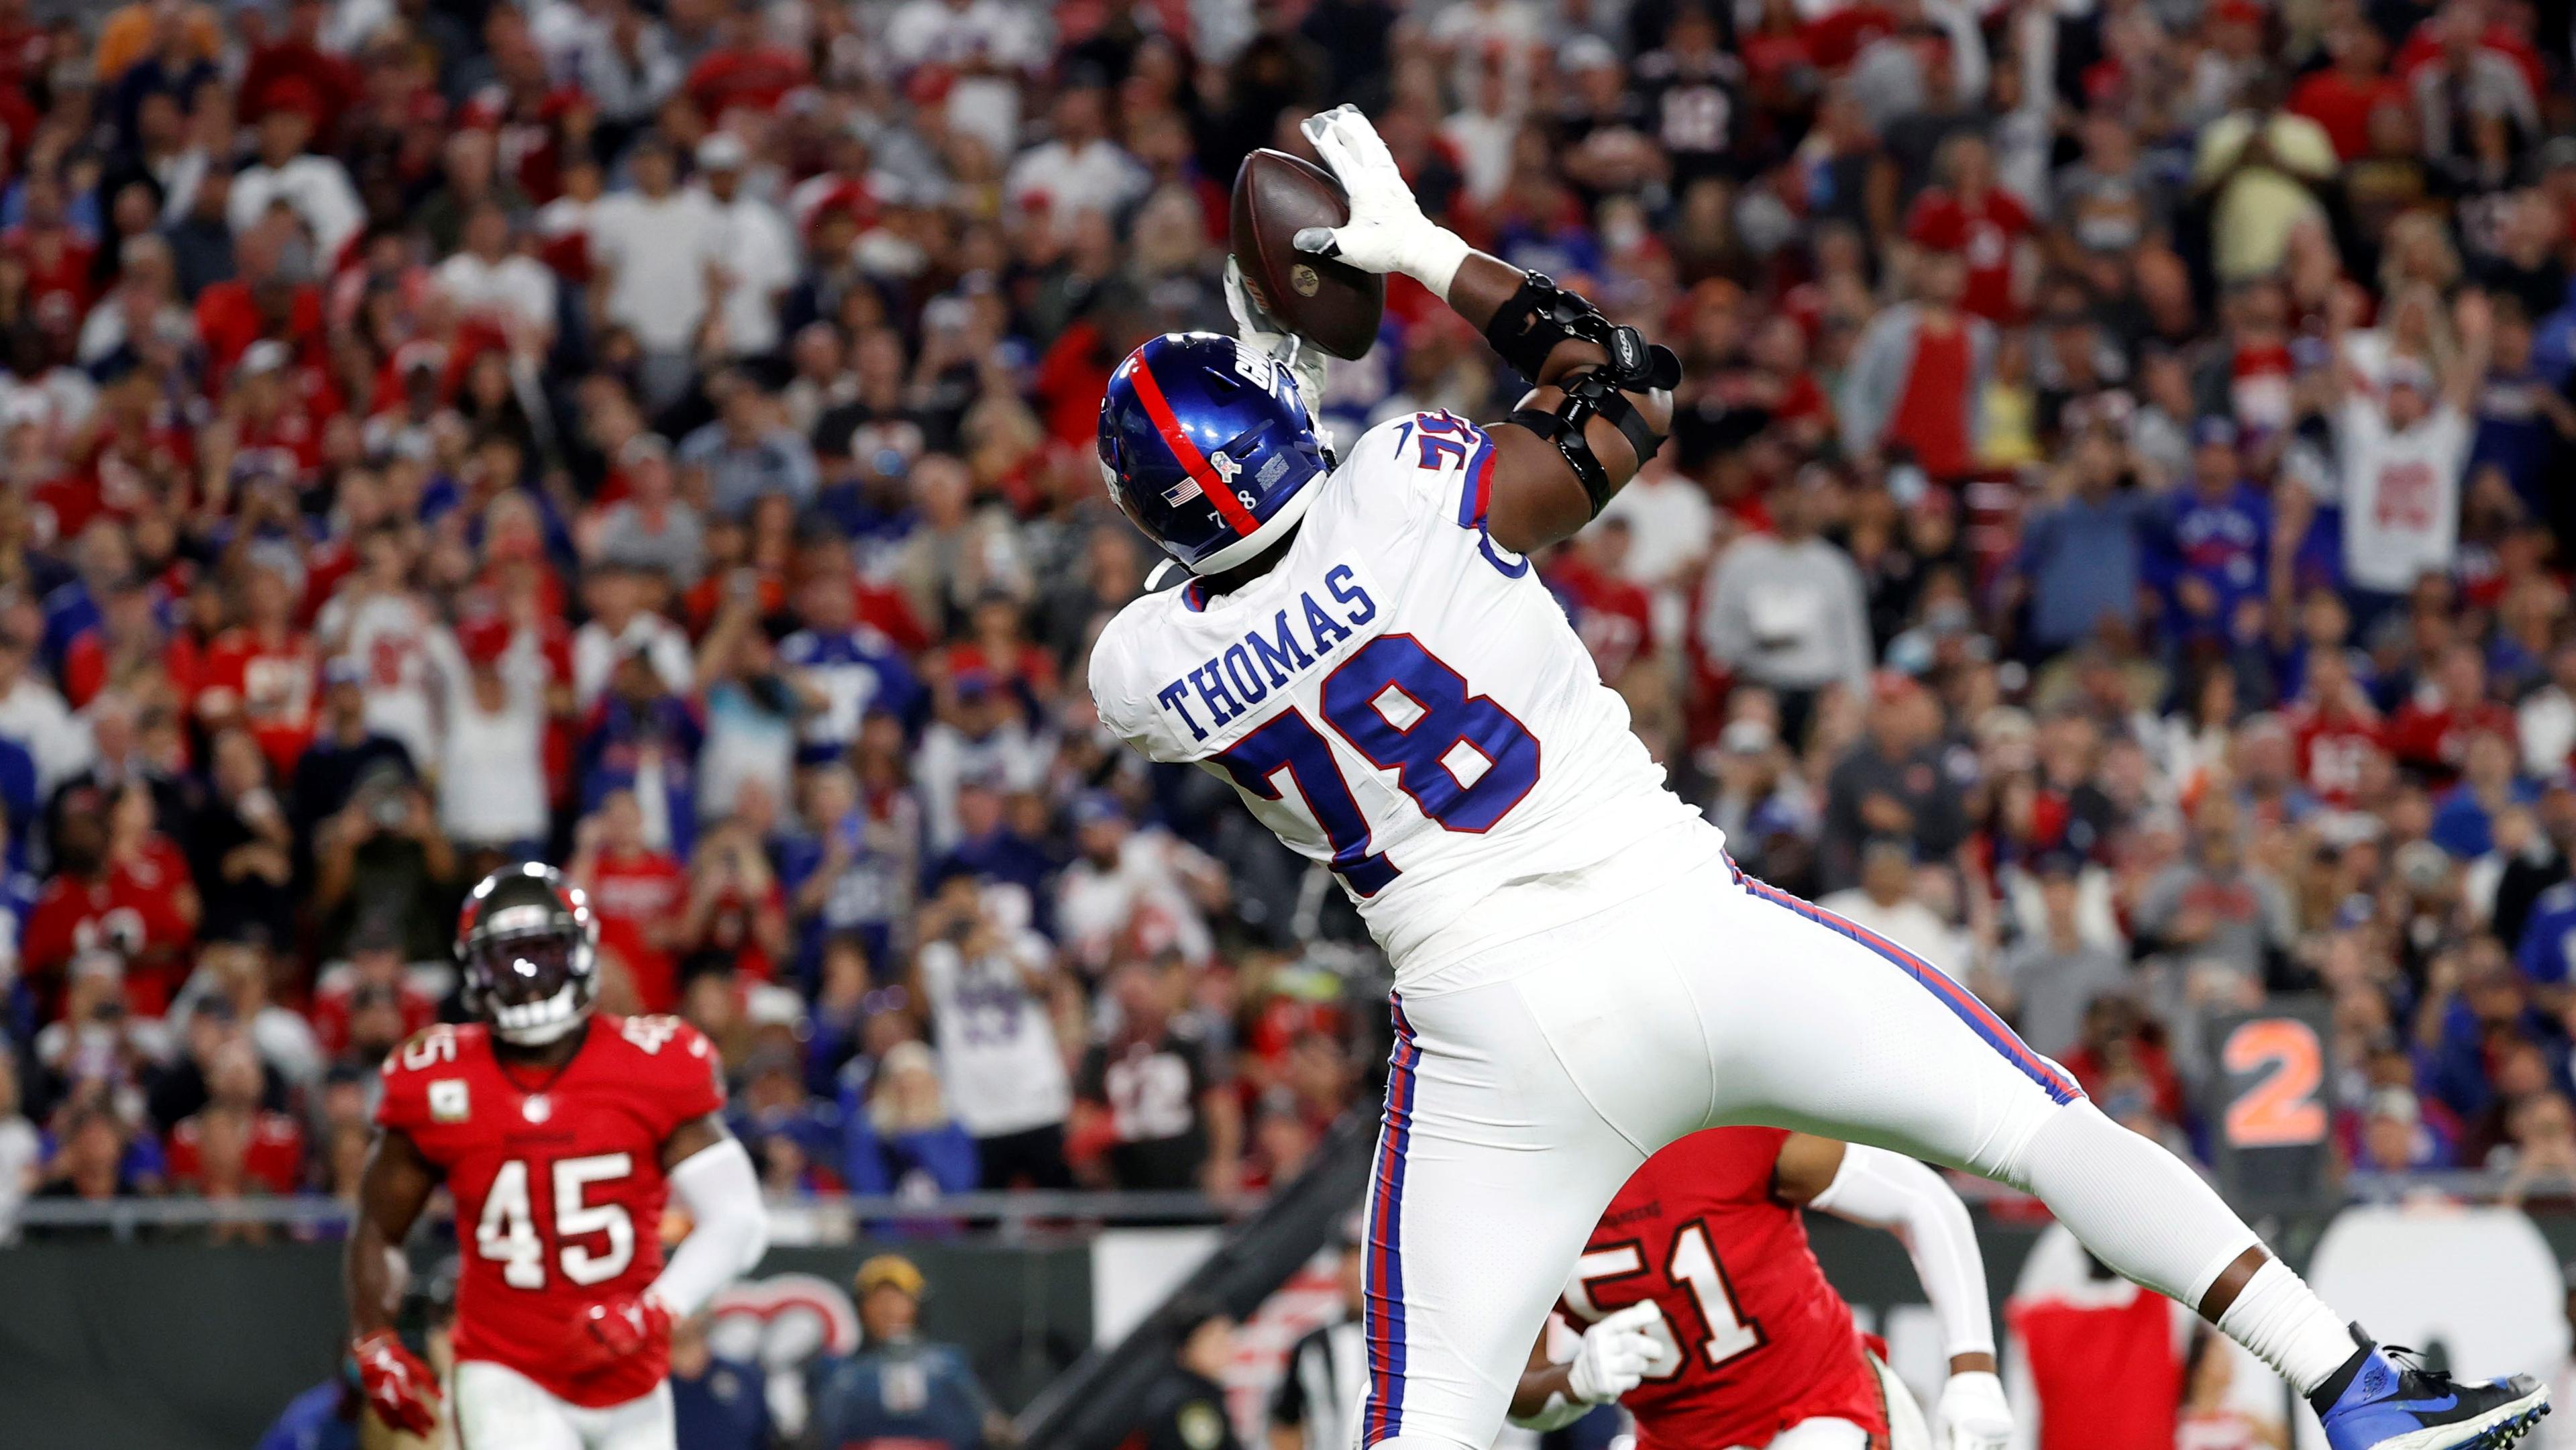 Nov 22, 2021; Tampa, Florida, USA;New York Giants offensive tackle Andrew Thomas (78) scores a touchdown against the Tampa Bay Buccaneers during the second quarter at Raymond James Stadium. Mandatory Credit: Kim Klement-USA TODAY Sports / Kim Klement-USA TODAY Sports